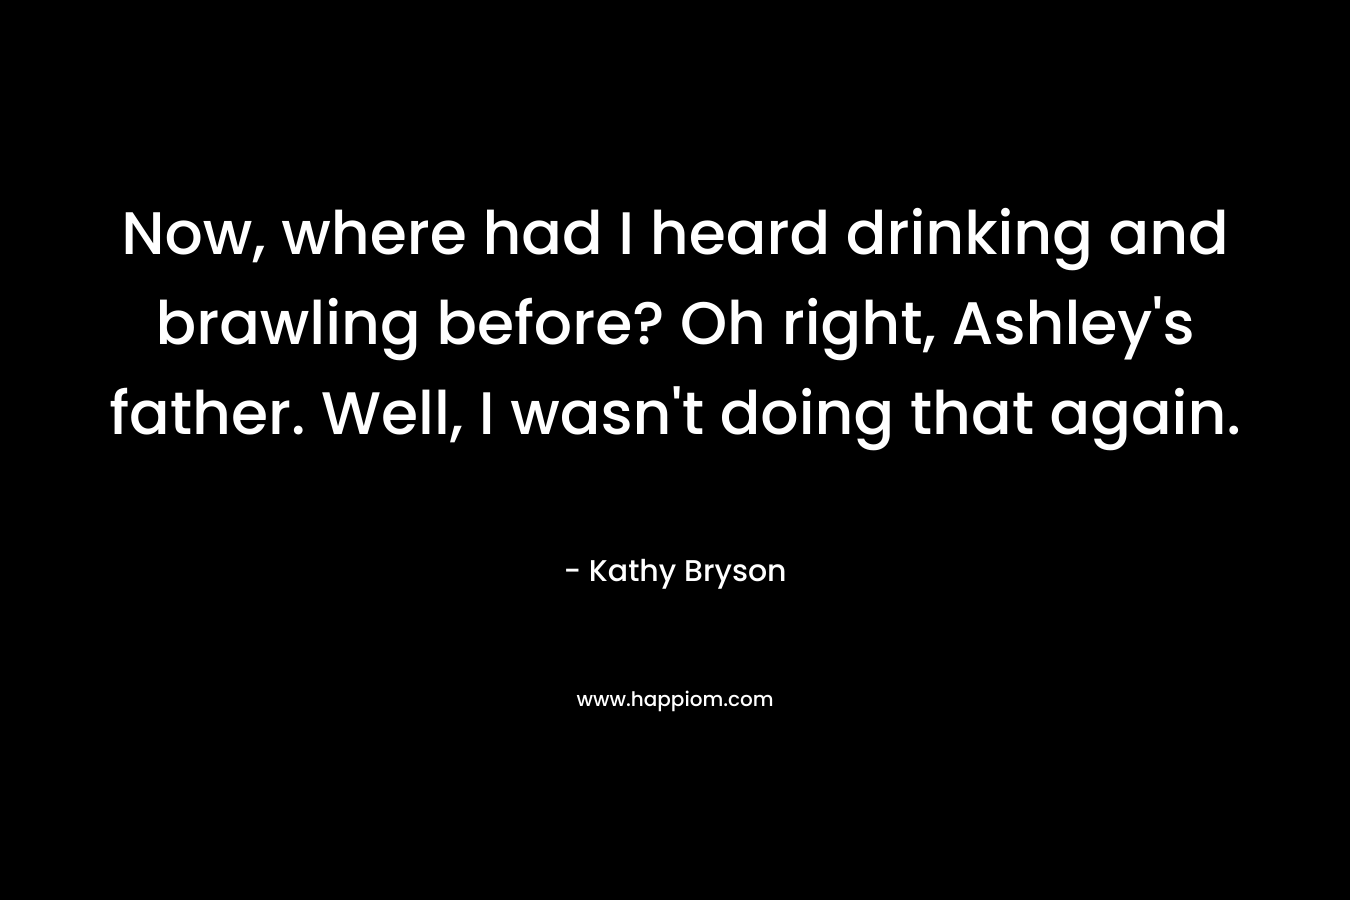 Now, where had I heard drinking and brawling before? Oh right, Ashley’s father. Well, I wasn’t doing that again. – Kathy Bryson